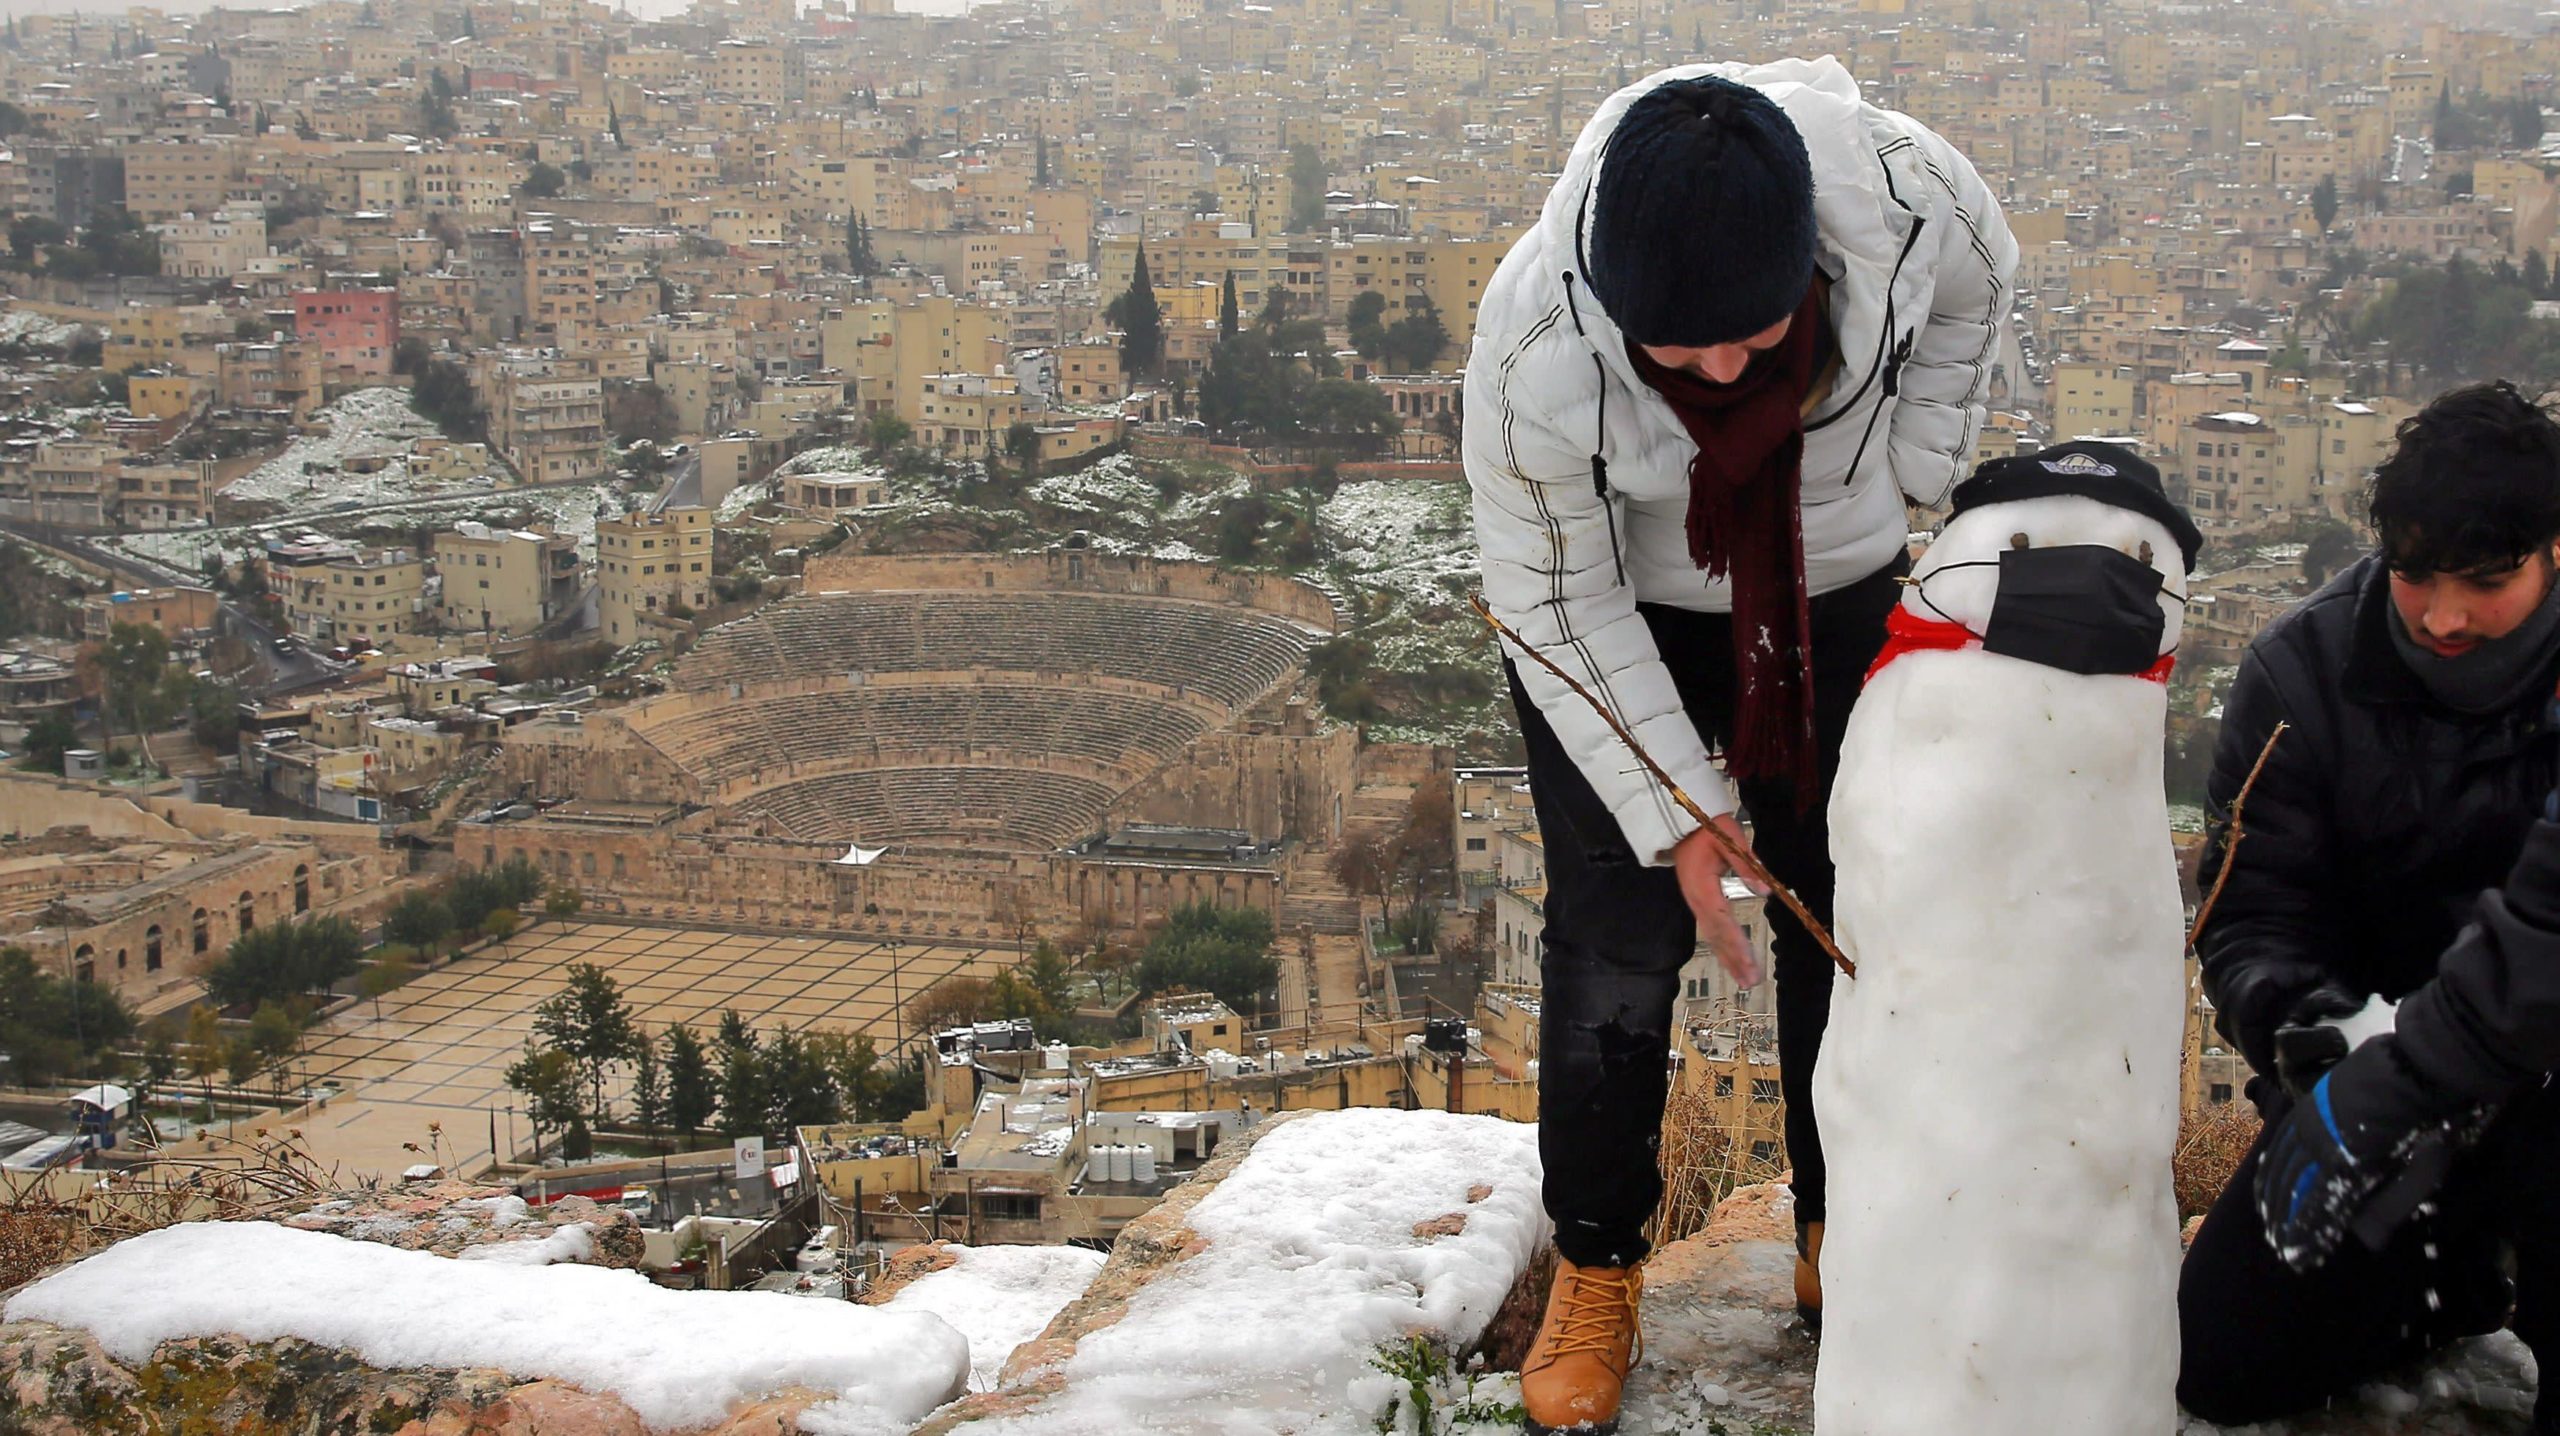 Jordanians make a snowman in the ruins of the Amman Citadel following a snowstorm in the Jordanian capital Amman, on Feb. 18, 2021. (Photo: Khalil Mazrawwi, Getty Images)